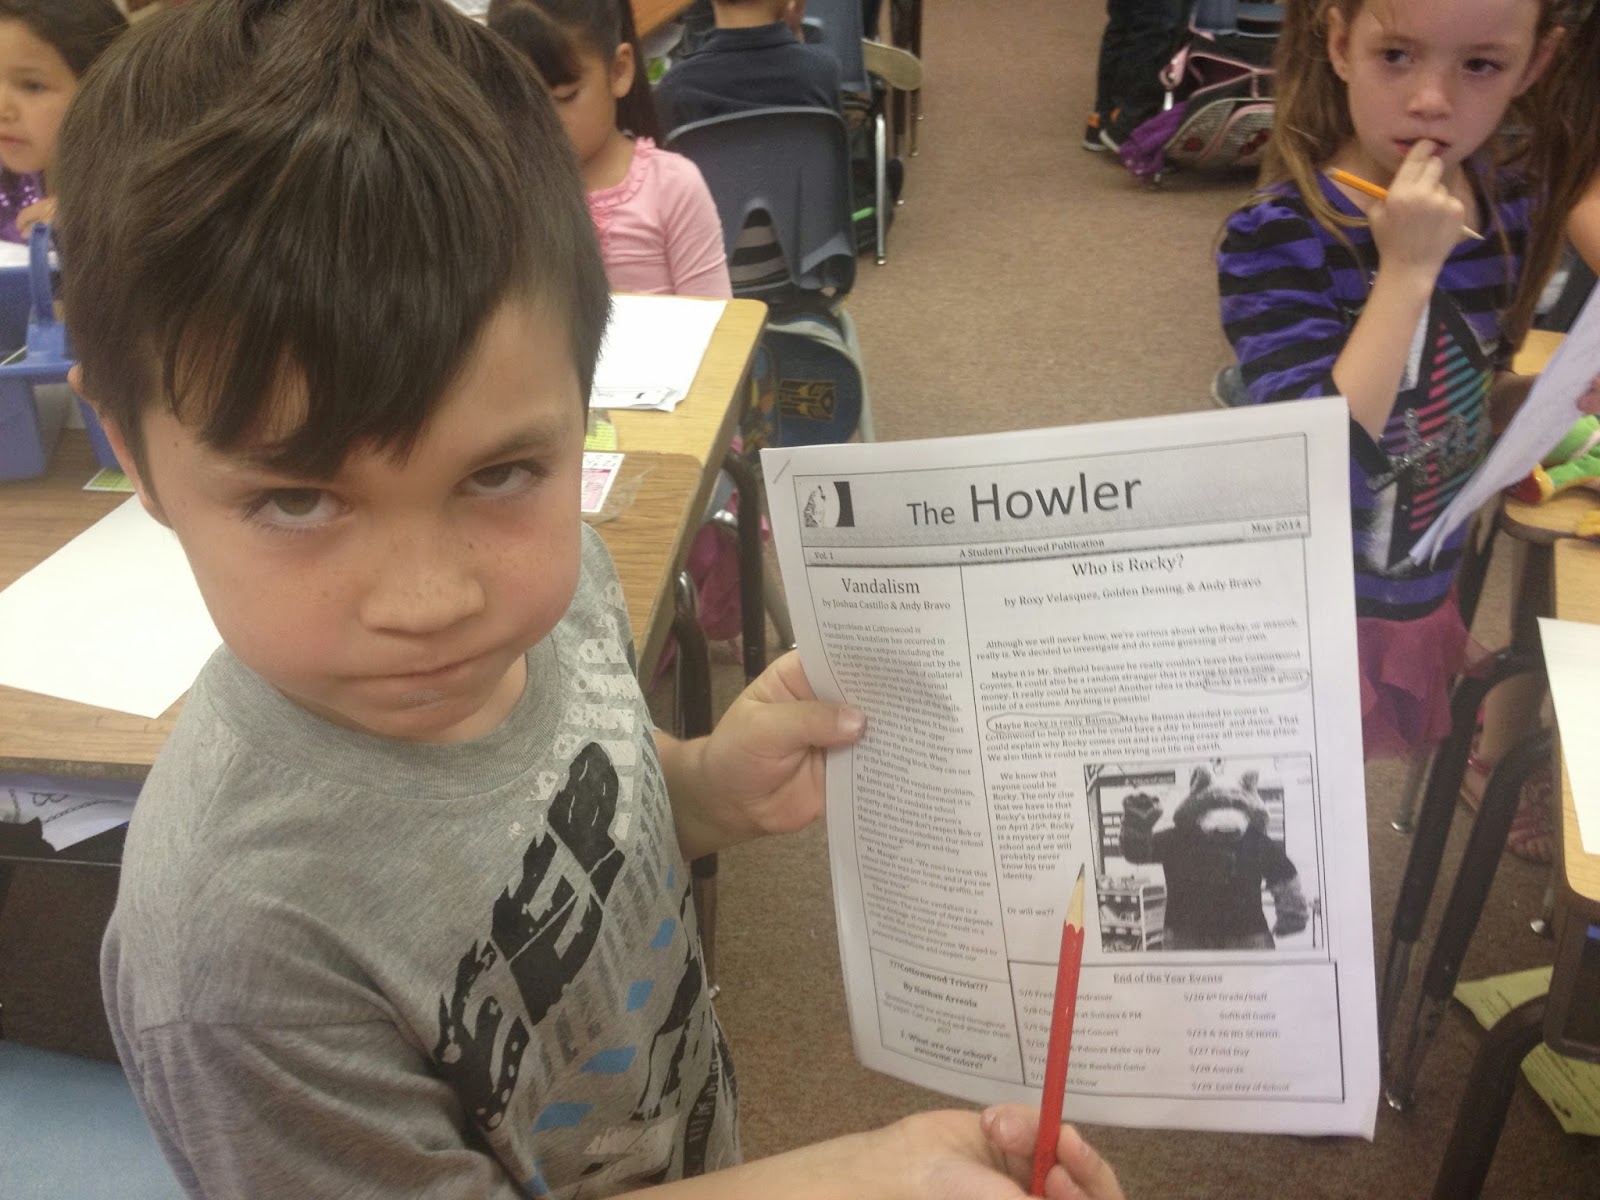 "First Graders Offended By School News Article!"